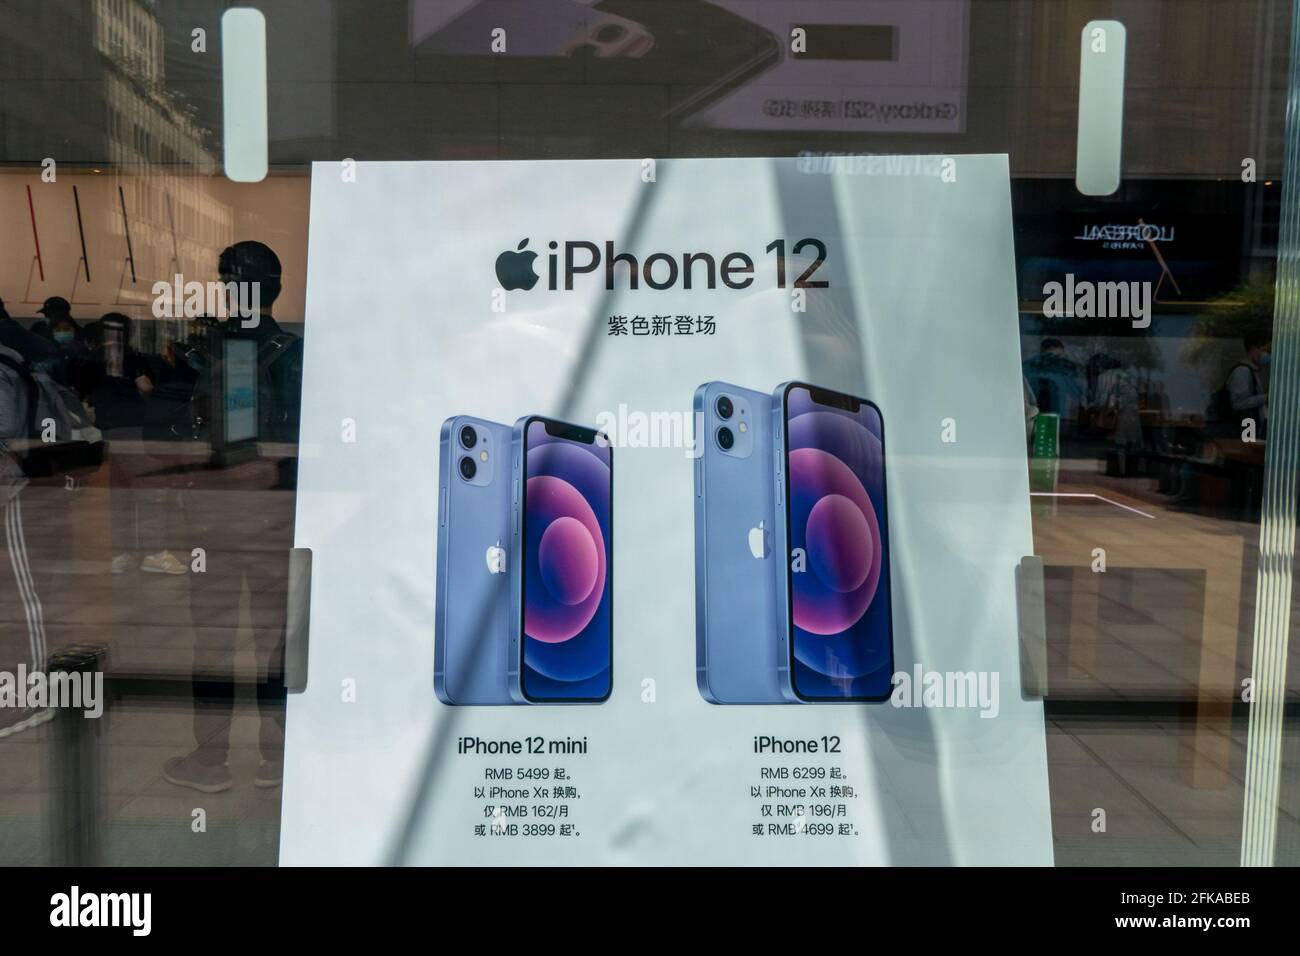 Shanghai China April 30 21 Iphone 12 12 Mini Purple Poster Is Seen At An Apple Store In Shanghai China April 30 21 Photo By Wang Gang Costfoto Sipa Usa Stock Photo Alamy